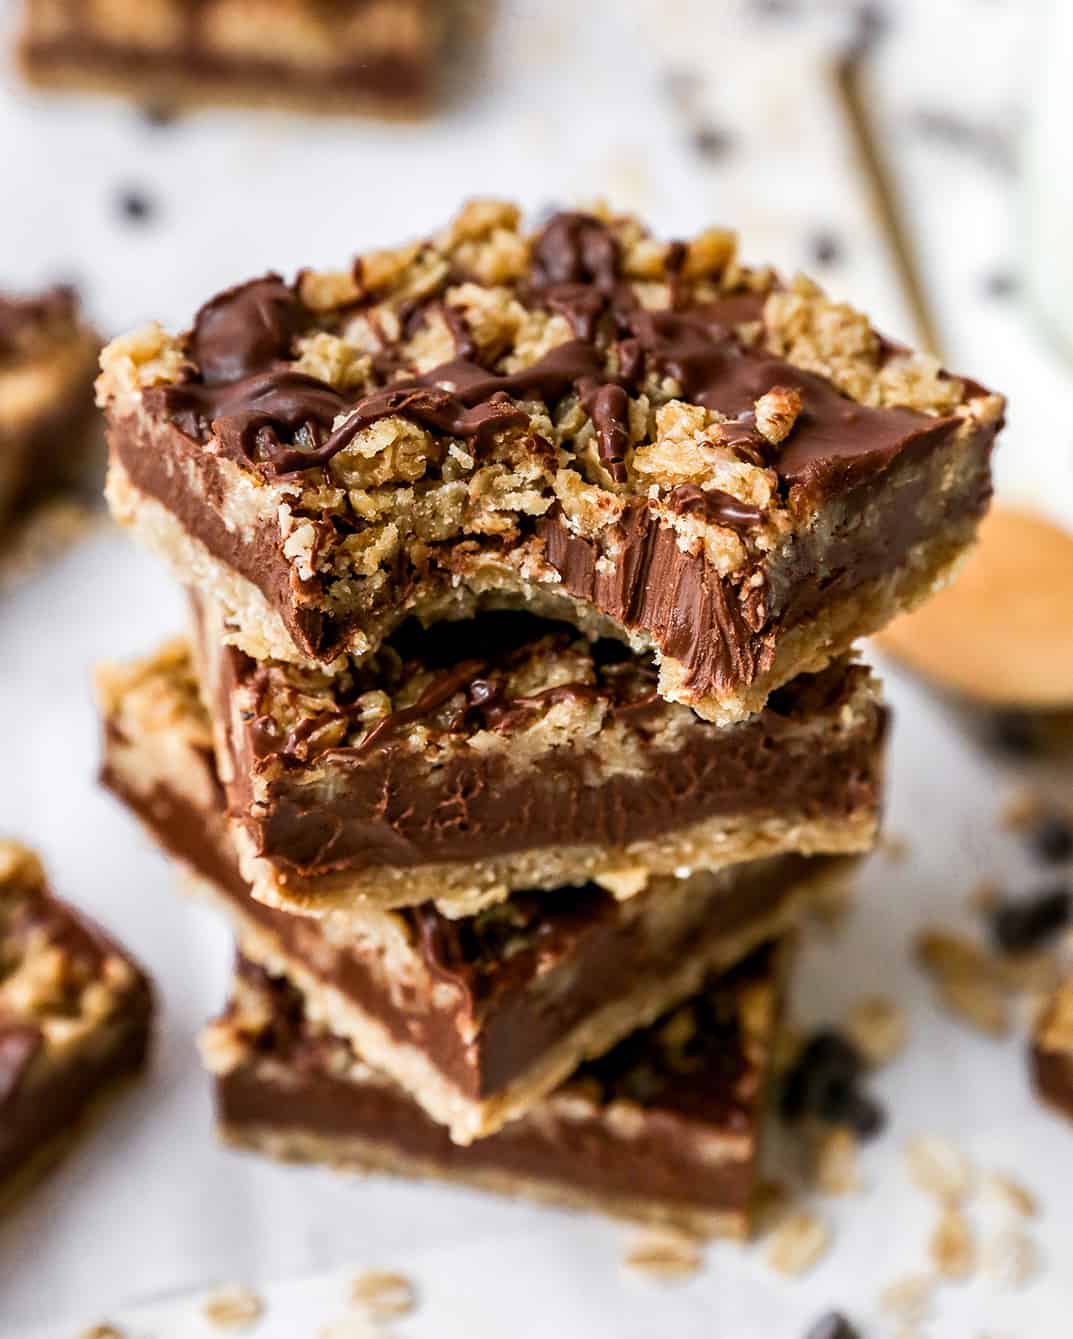 a stack fo 4 No-Bake Chocolate Peanut Butter Oatmeal Bars, the top one has a bite taken out of it